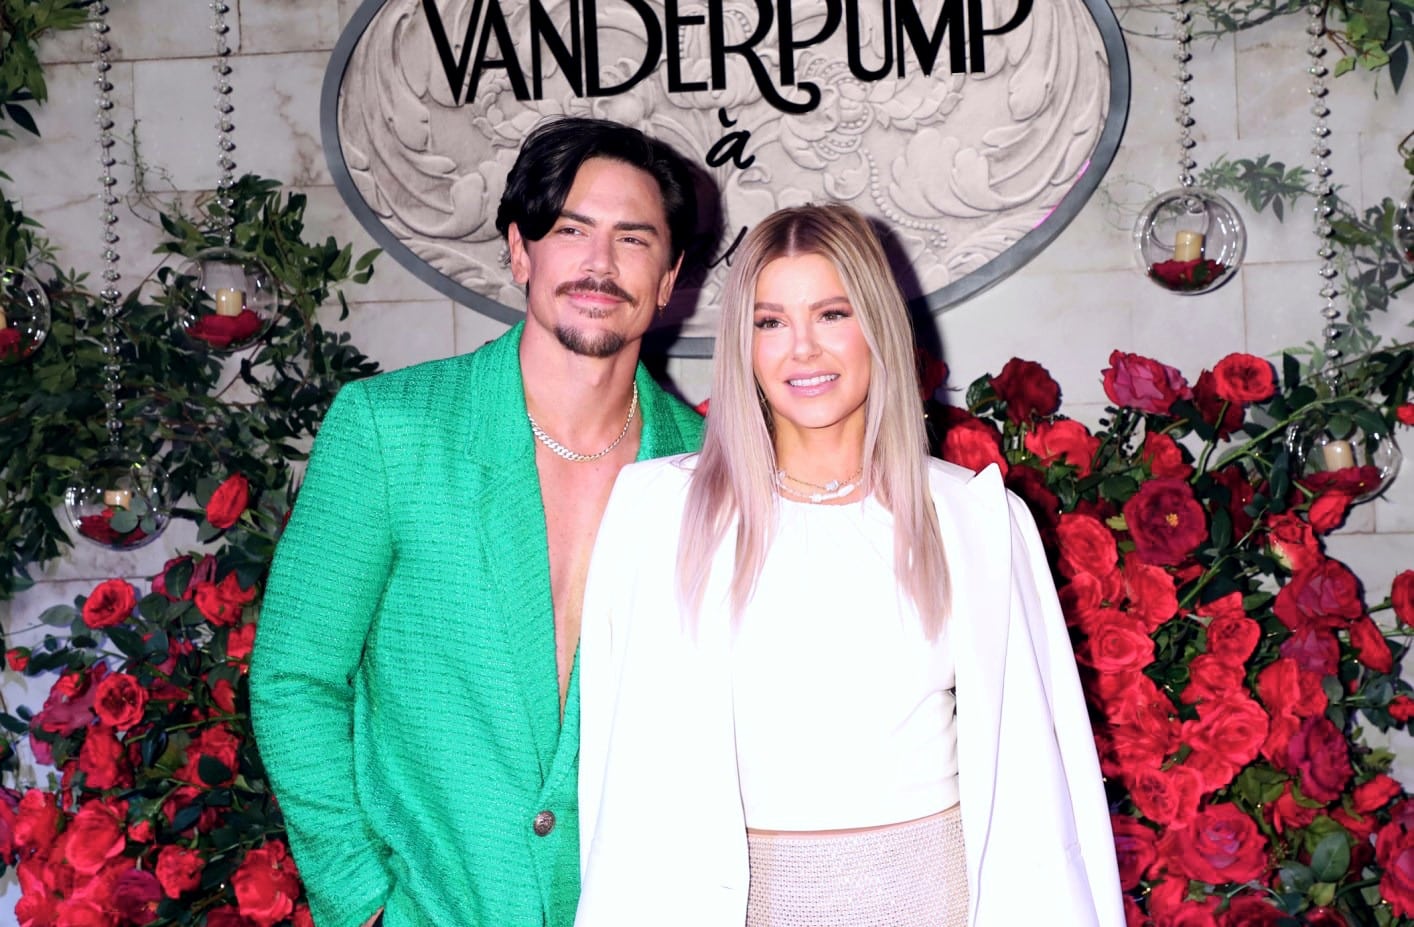 Pump Rules' Tom Sandoval and Ariana "Stopped Having Sex" Before Split, Plus Insider Says They're Deciding Who Gets What as He's "Ready to Move On"